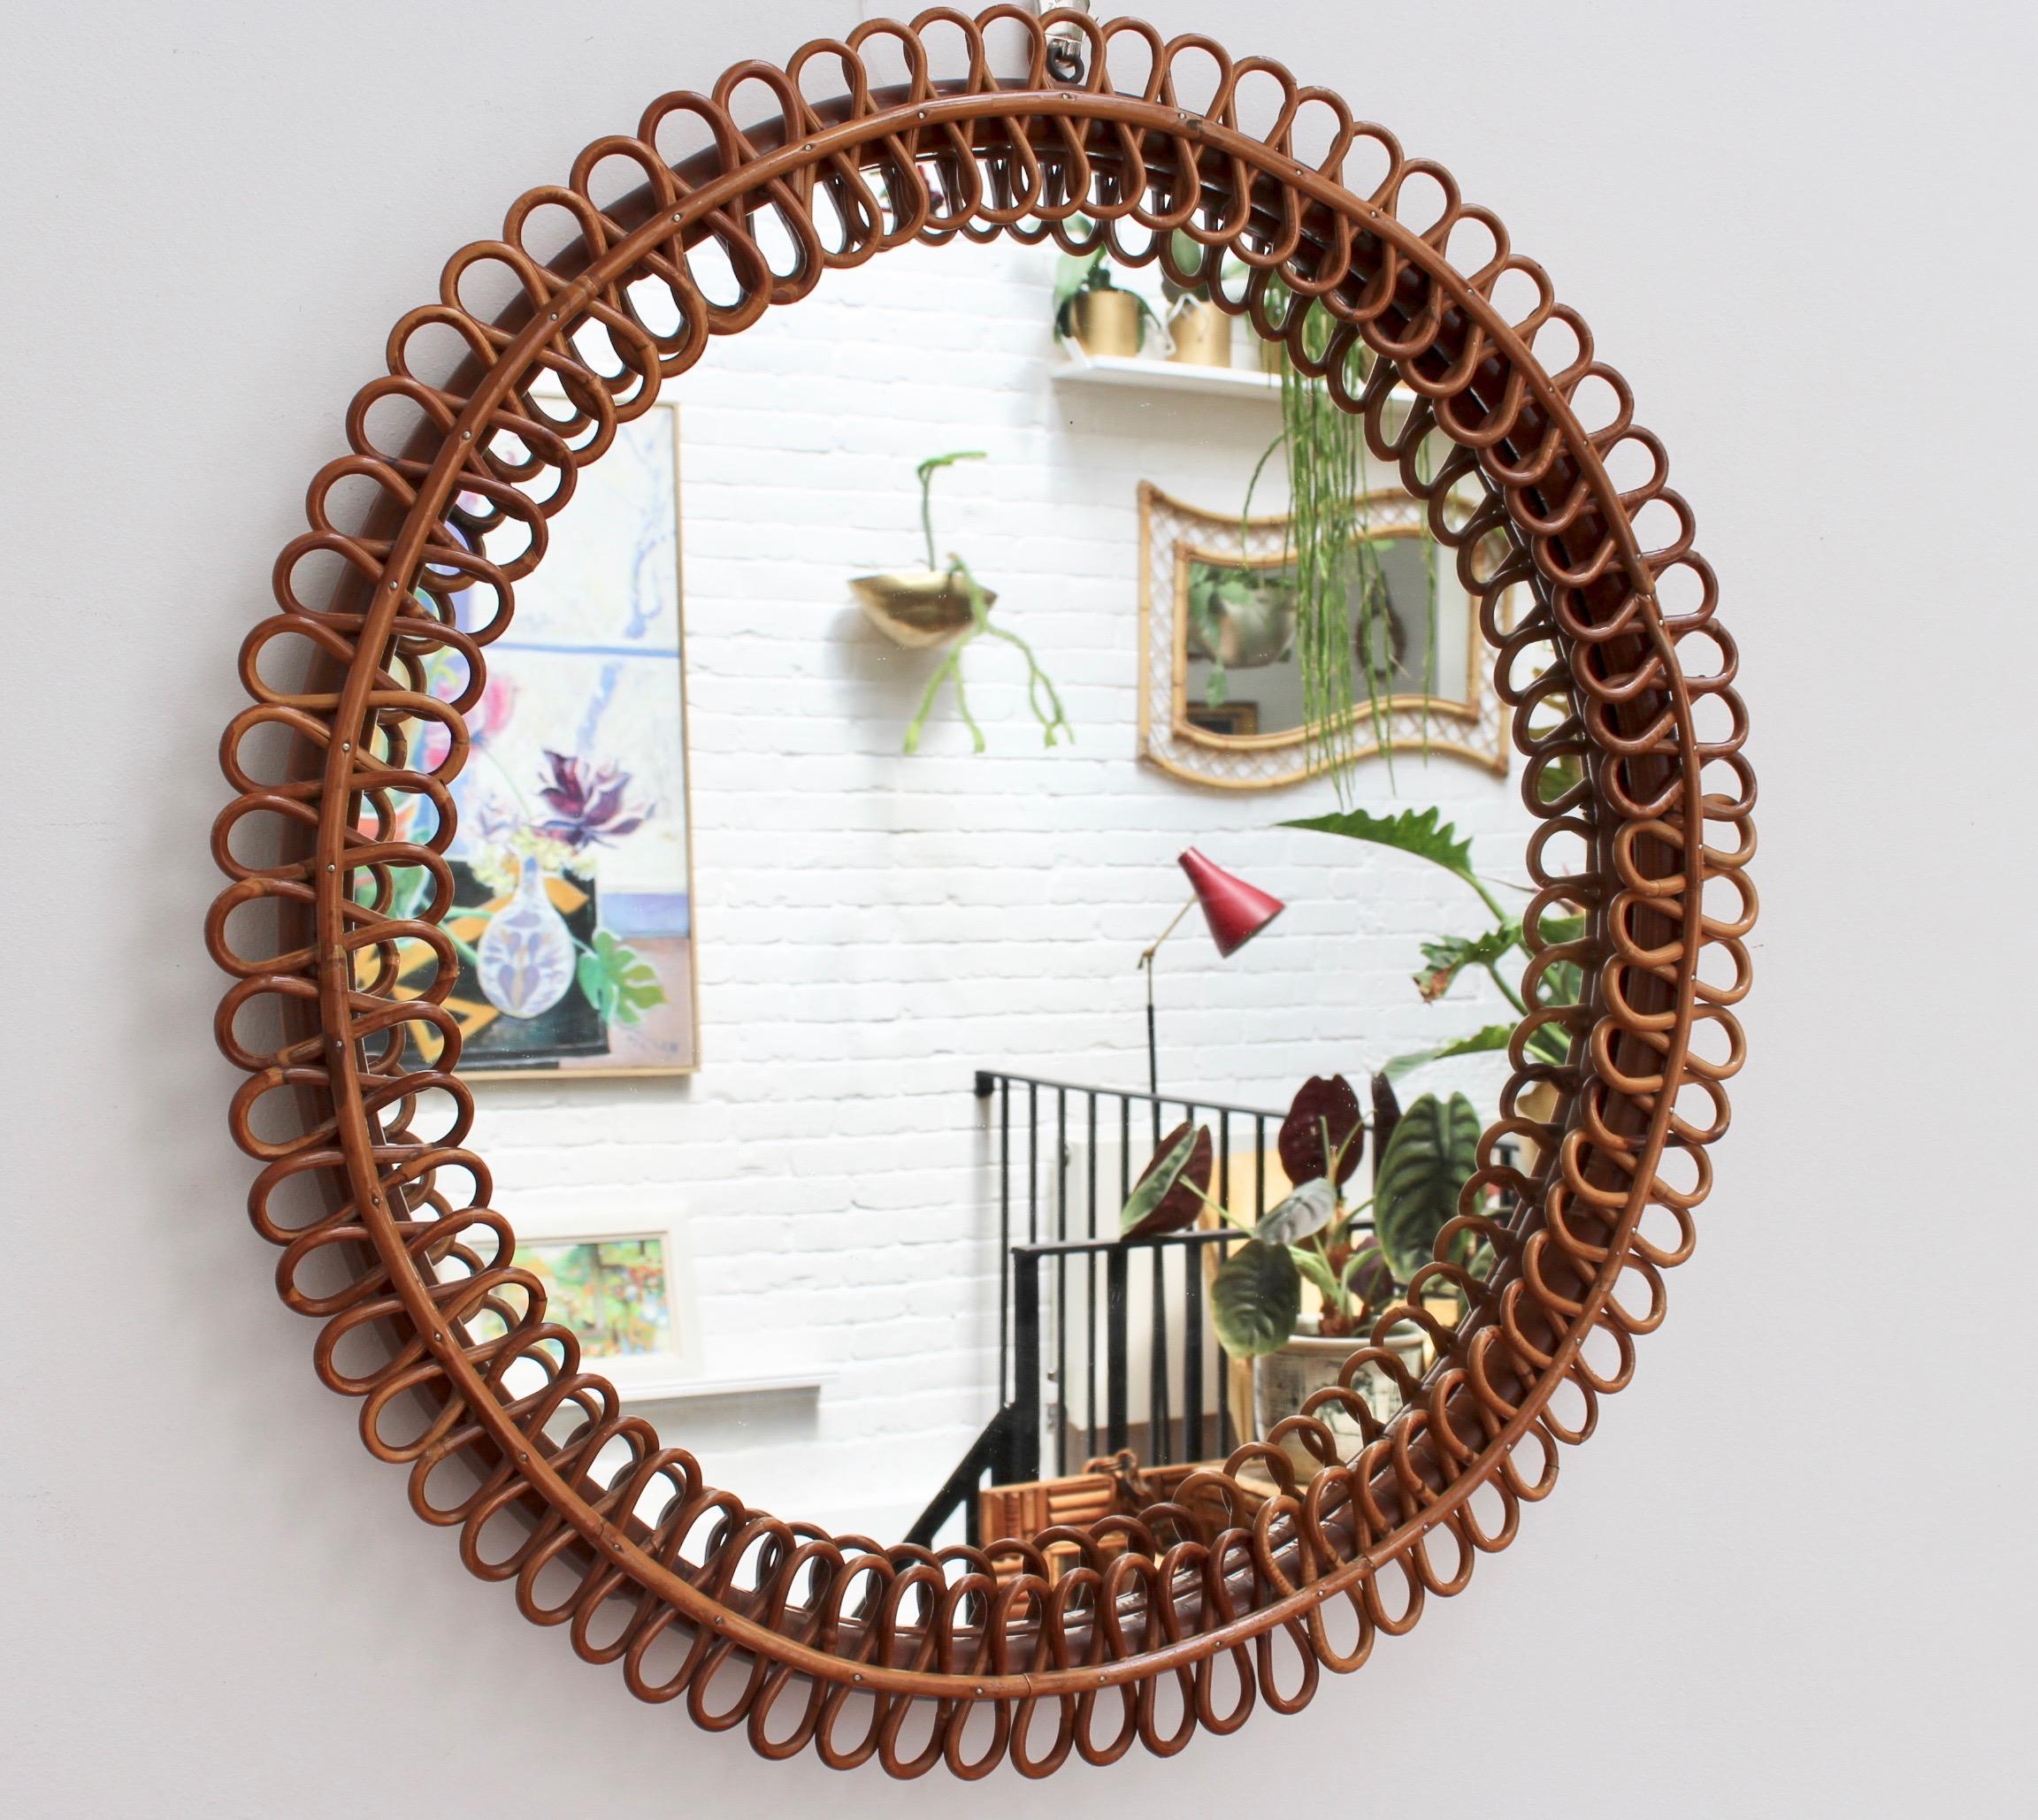 Mid-century Italian rattan round wall mirror (circa 1960s). This mirror has a very delightful circular sun-shape framed with whimsical rattan figure-eights. There is a characterful, aged patina on the mirror frame and overall, the piece is in good